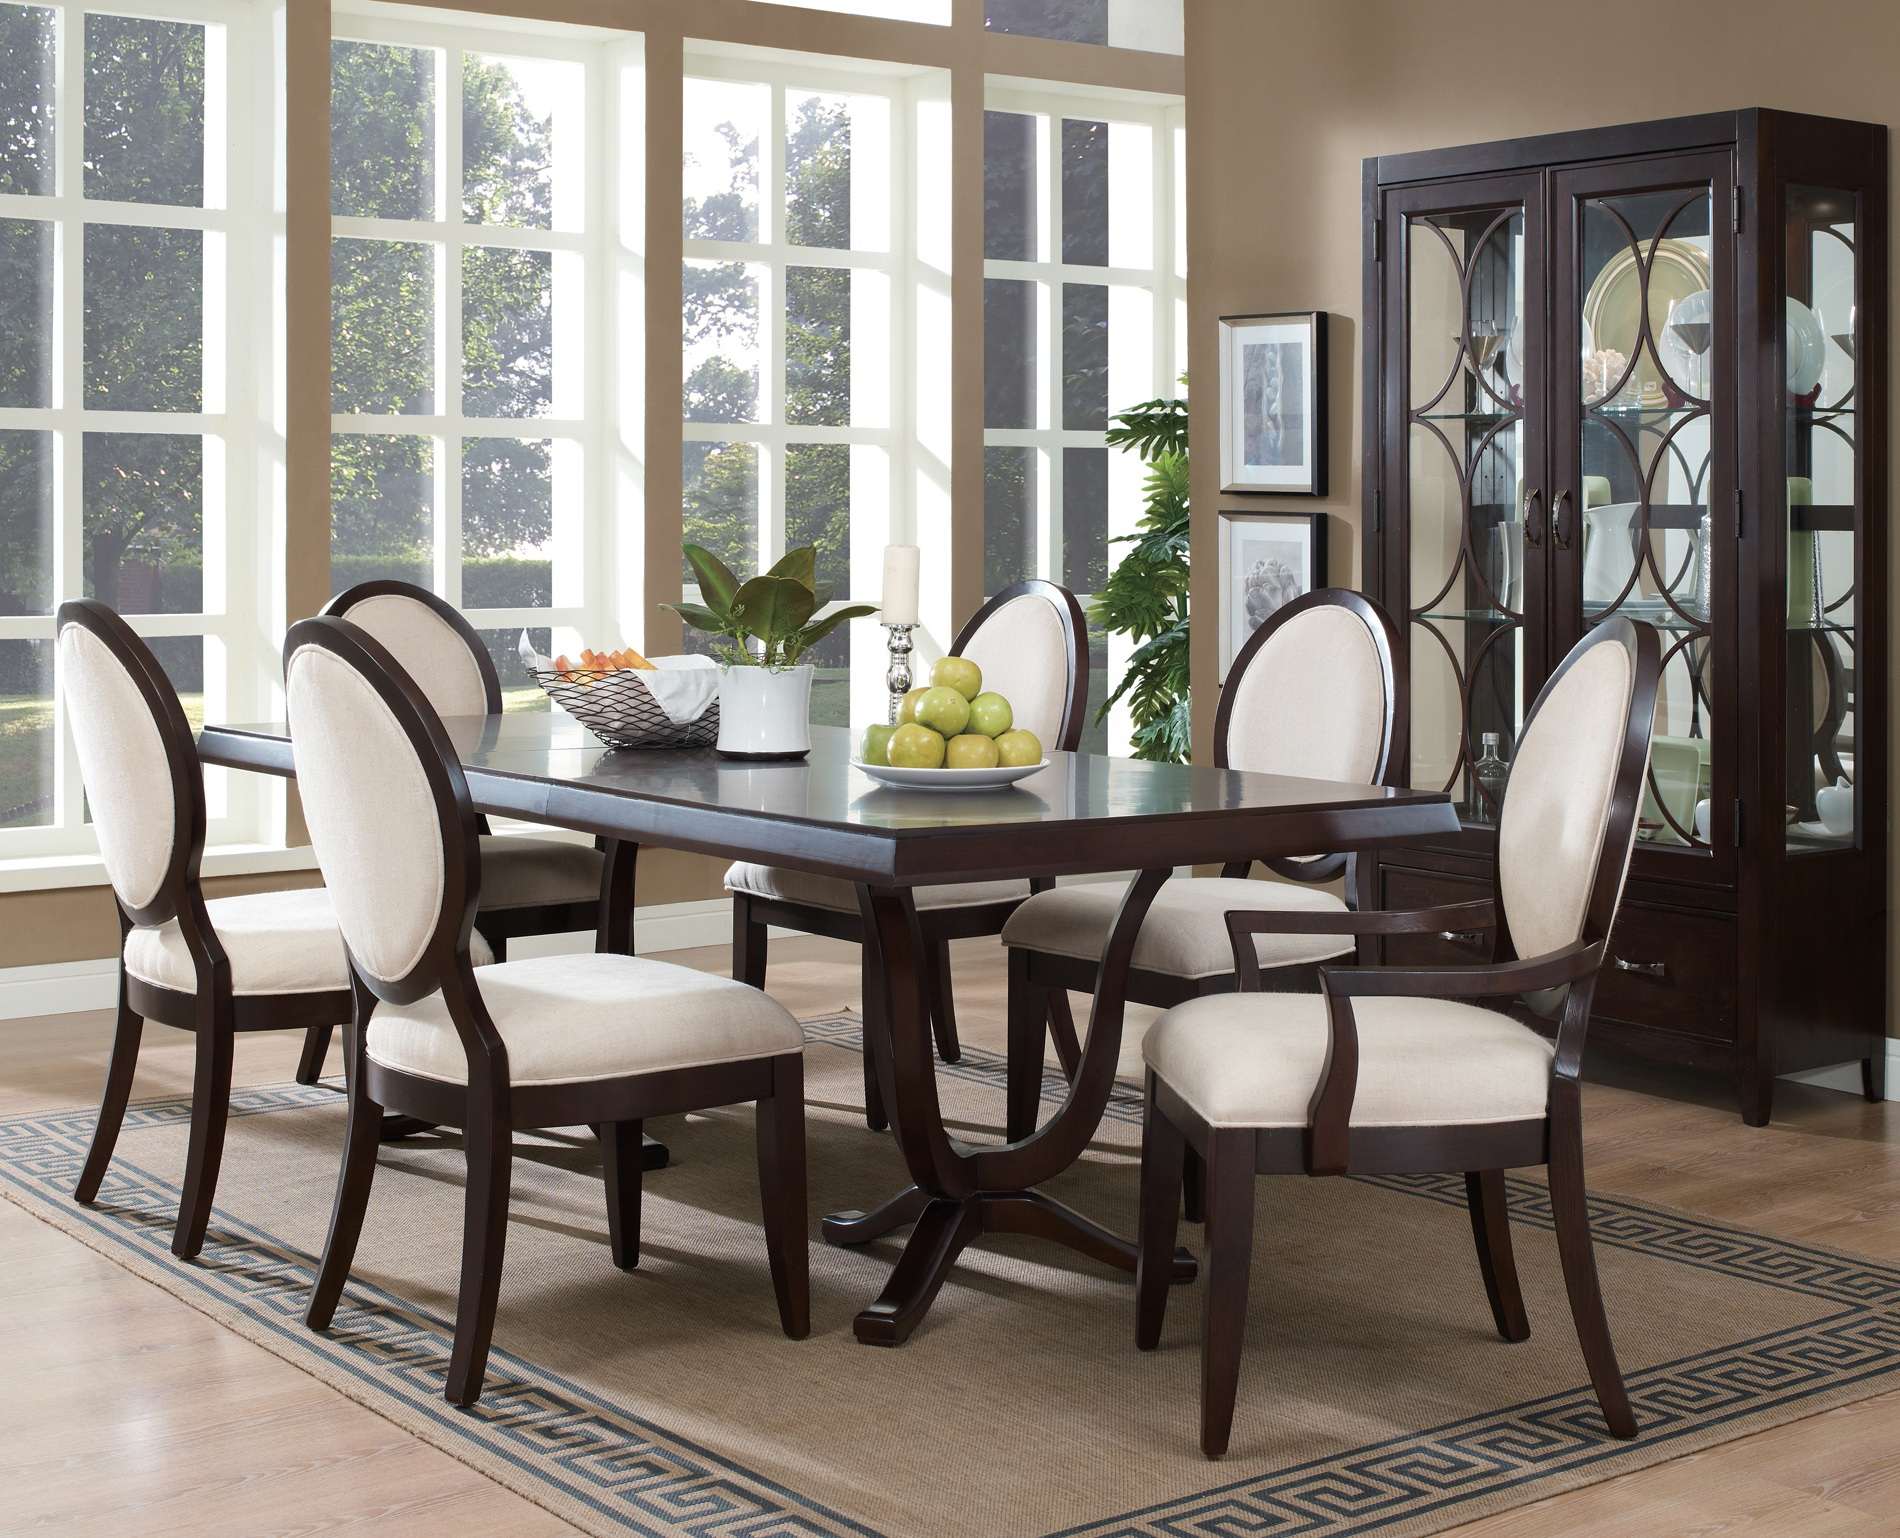 Modern Dining Room Tables South Africa Latest Home Decor inside proportions 1900 X 1538